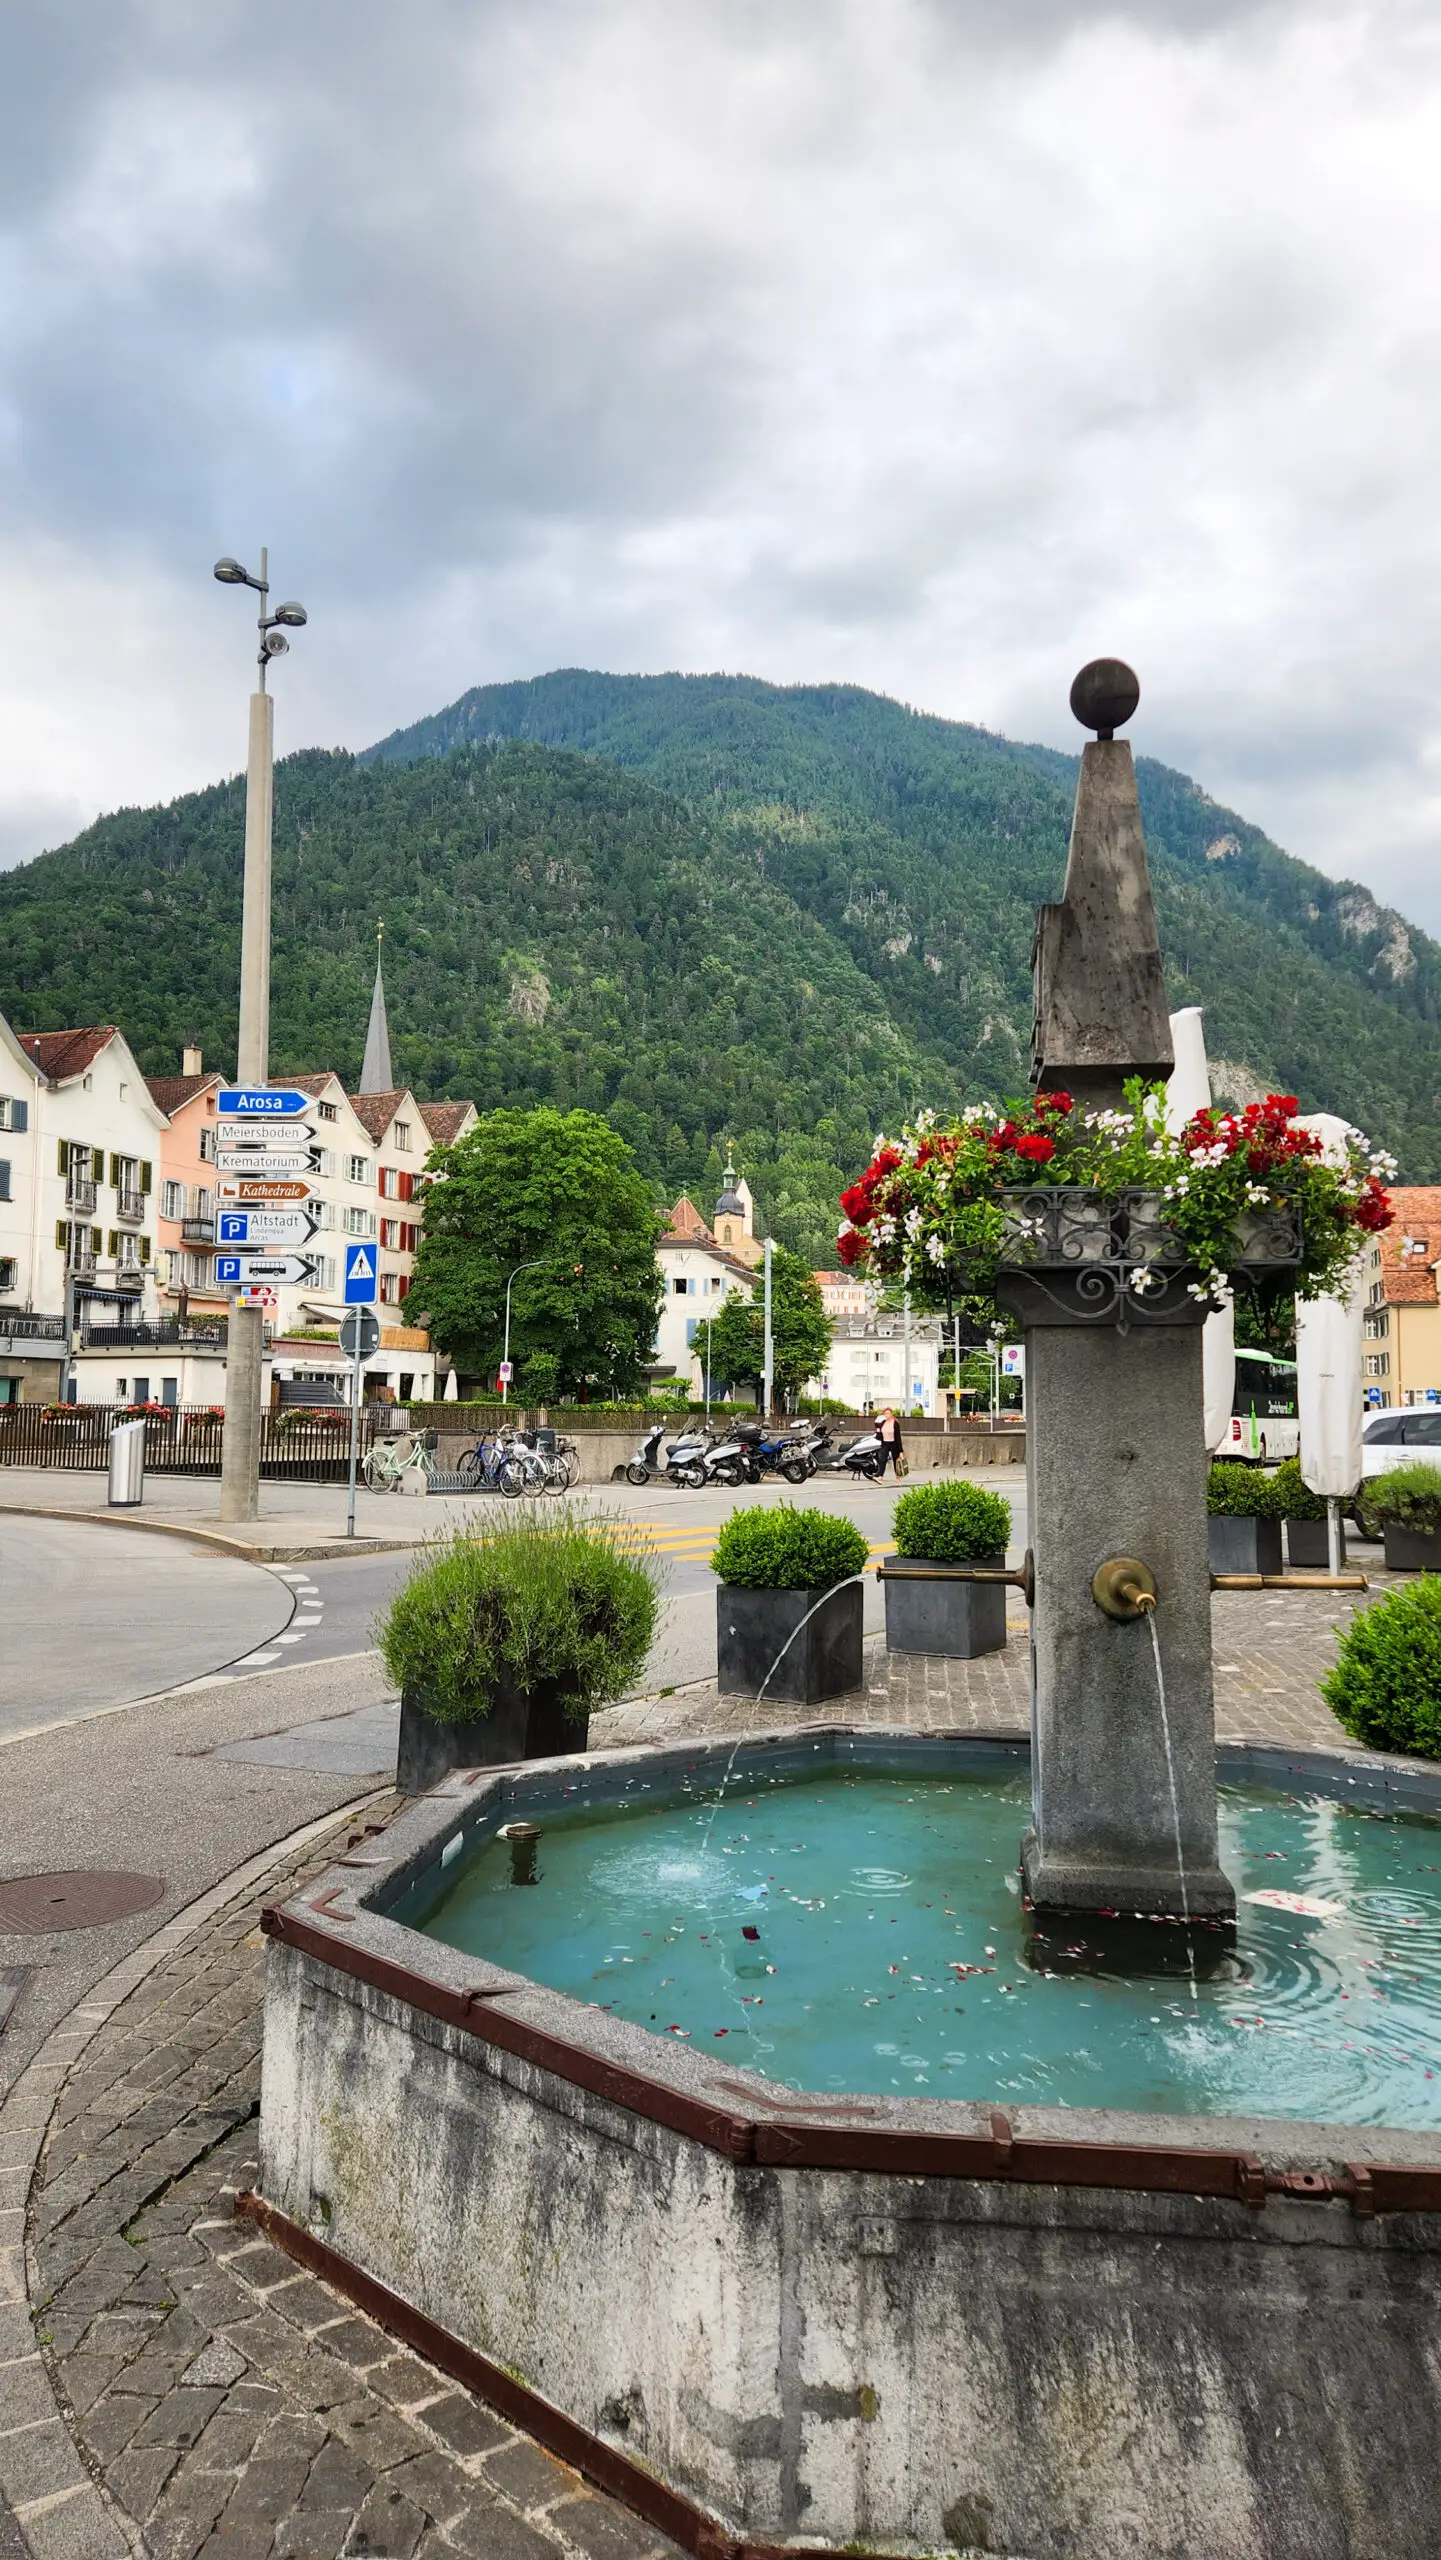 Chur Switzerland Trip | Value, Experiences, and Cost